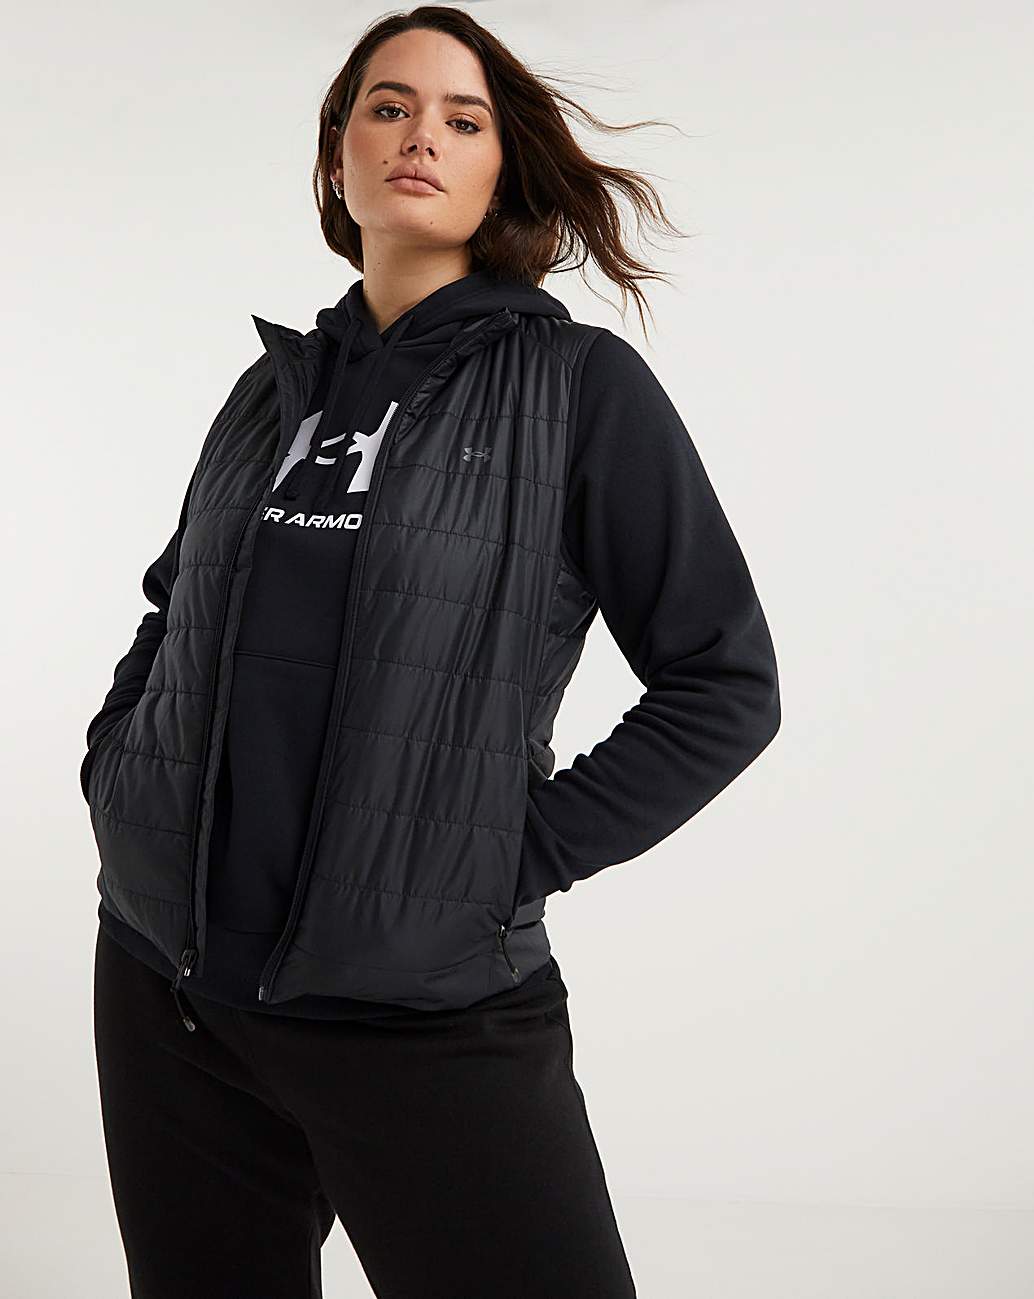 Under Armour Infrared Elevate Jacket - Women's